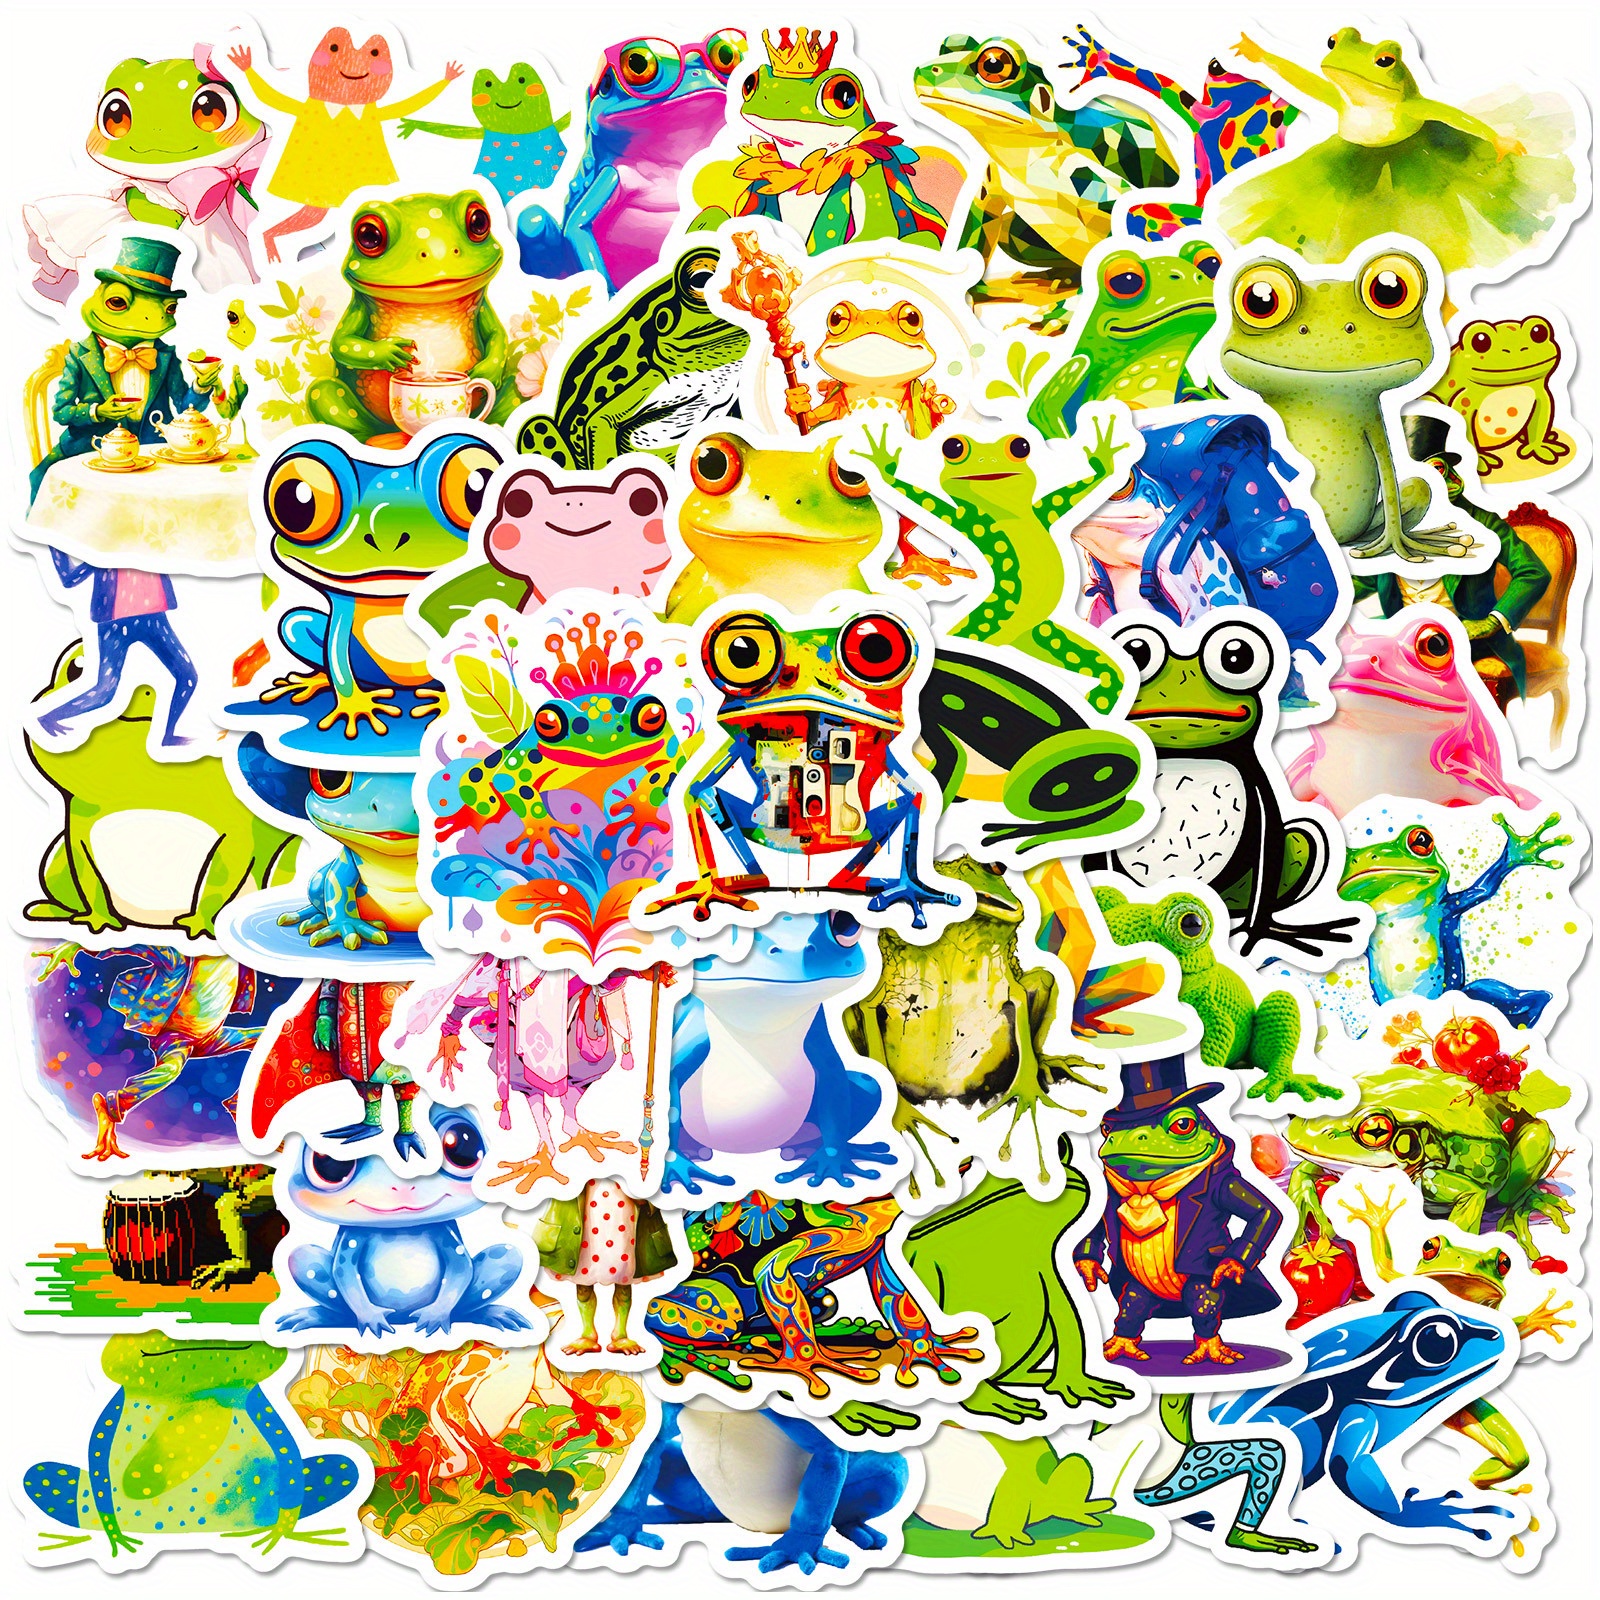 Home & Living :: Decals & Stickers :: 8 Pcs Frog Sticker Pack, Cute  Stickers, Frog Stickers